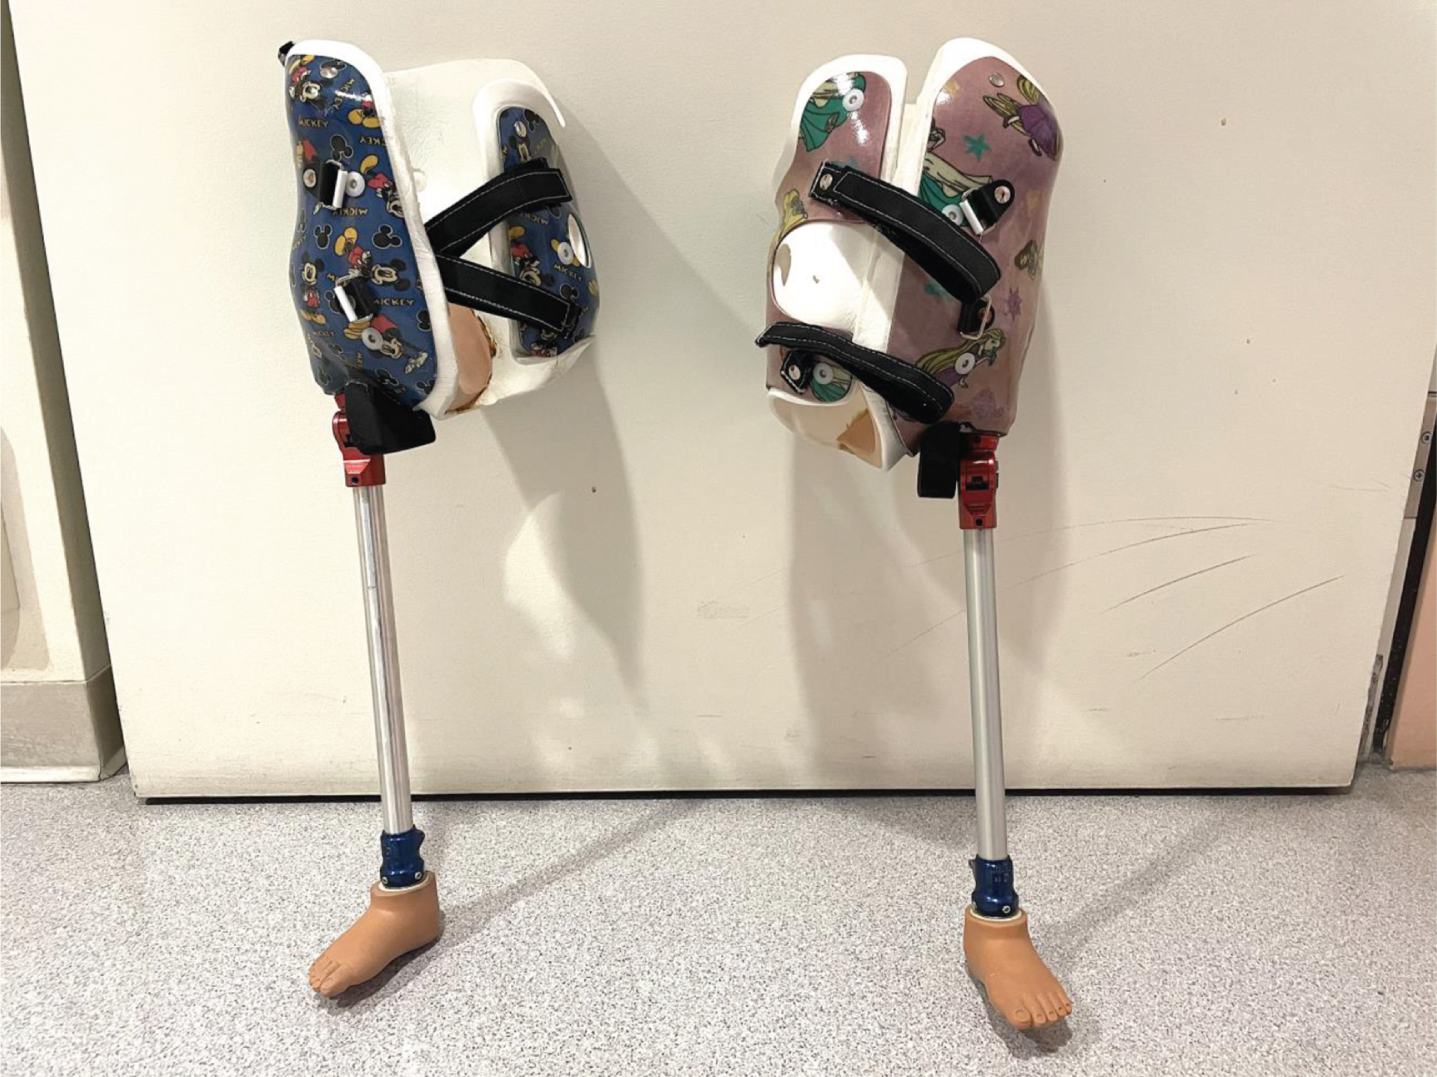 The hemipelvectomy prosthesis included a non-articulated pylon with a solid ankle cushion heel foot for a stable base of support. This was directly connected to the thoracolumbosacral orthosis.